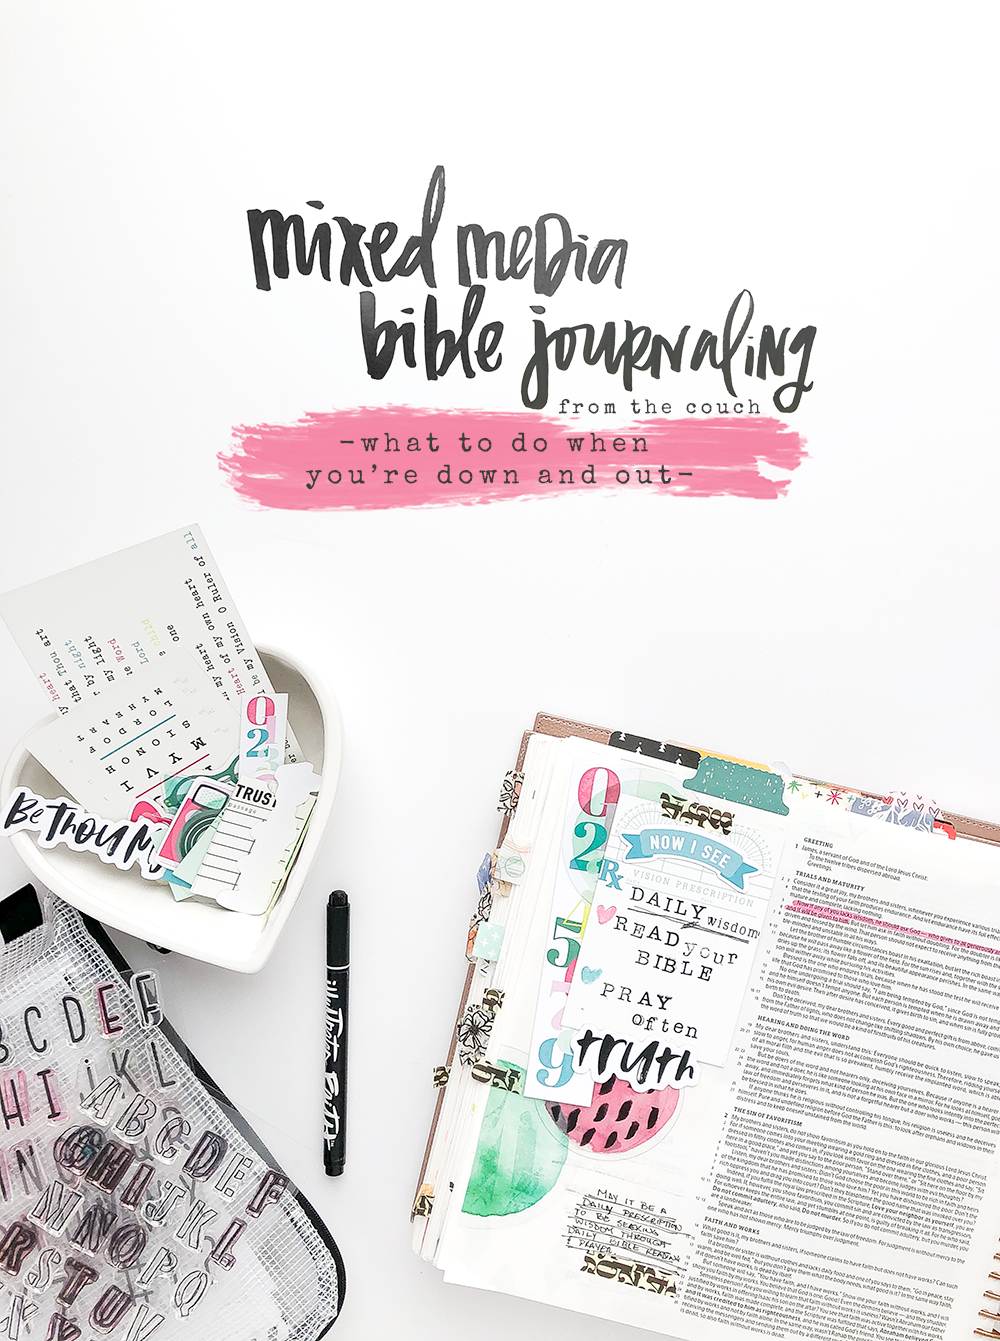 5 Steps to Bible Journaling for Beginners